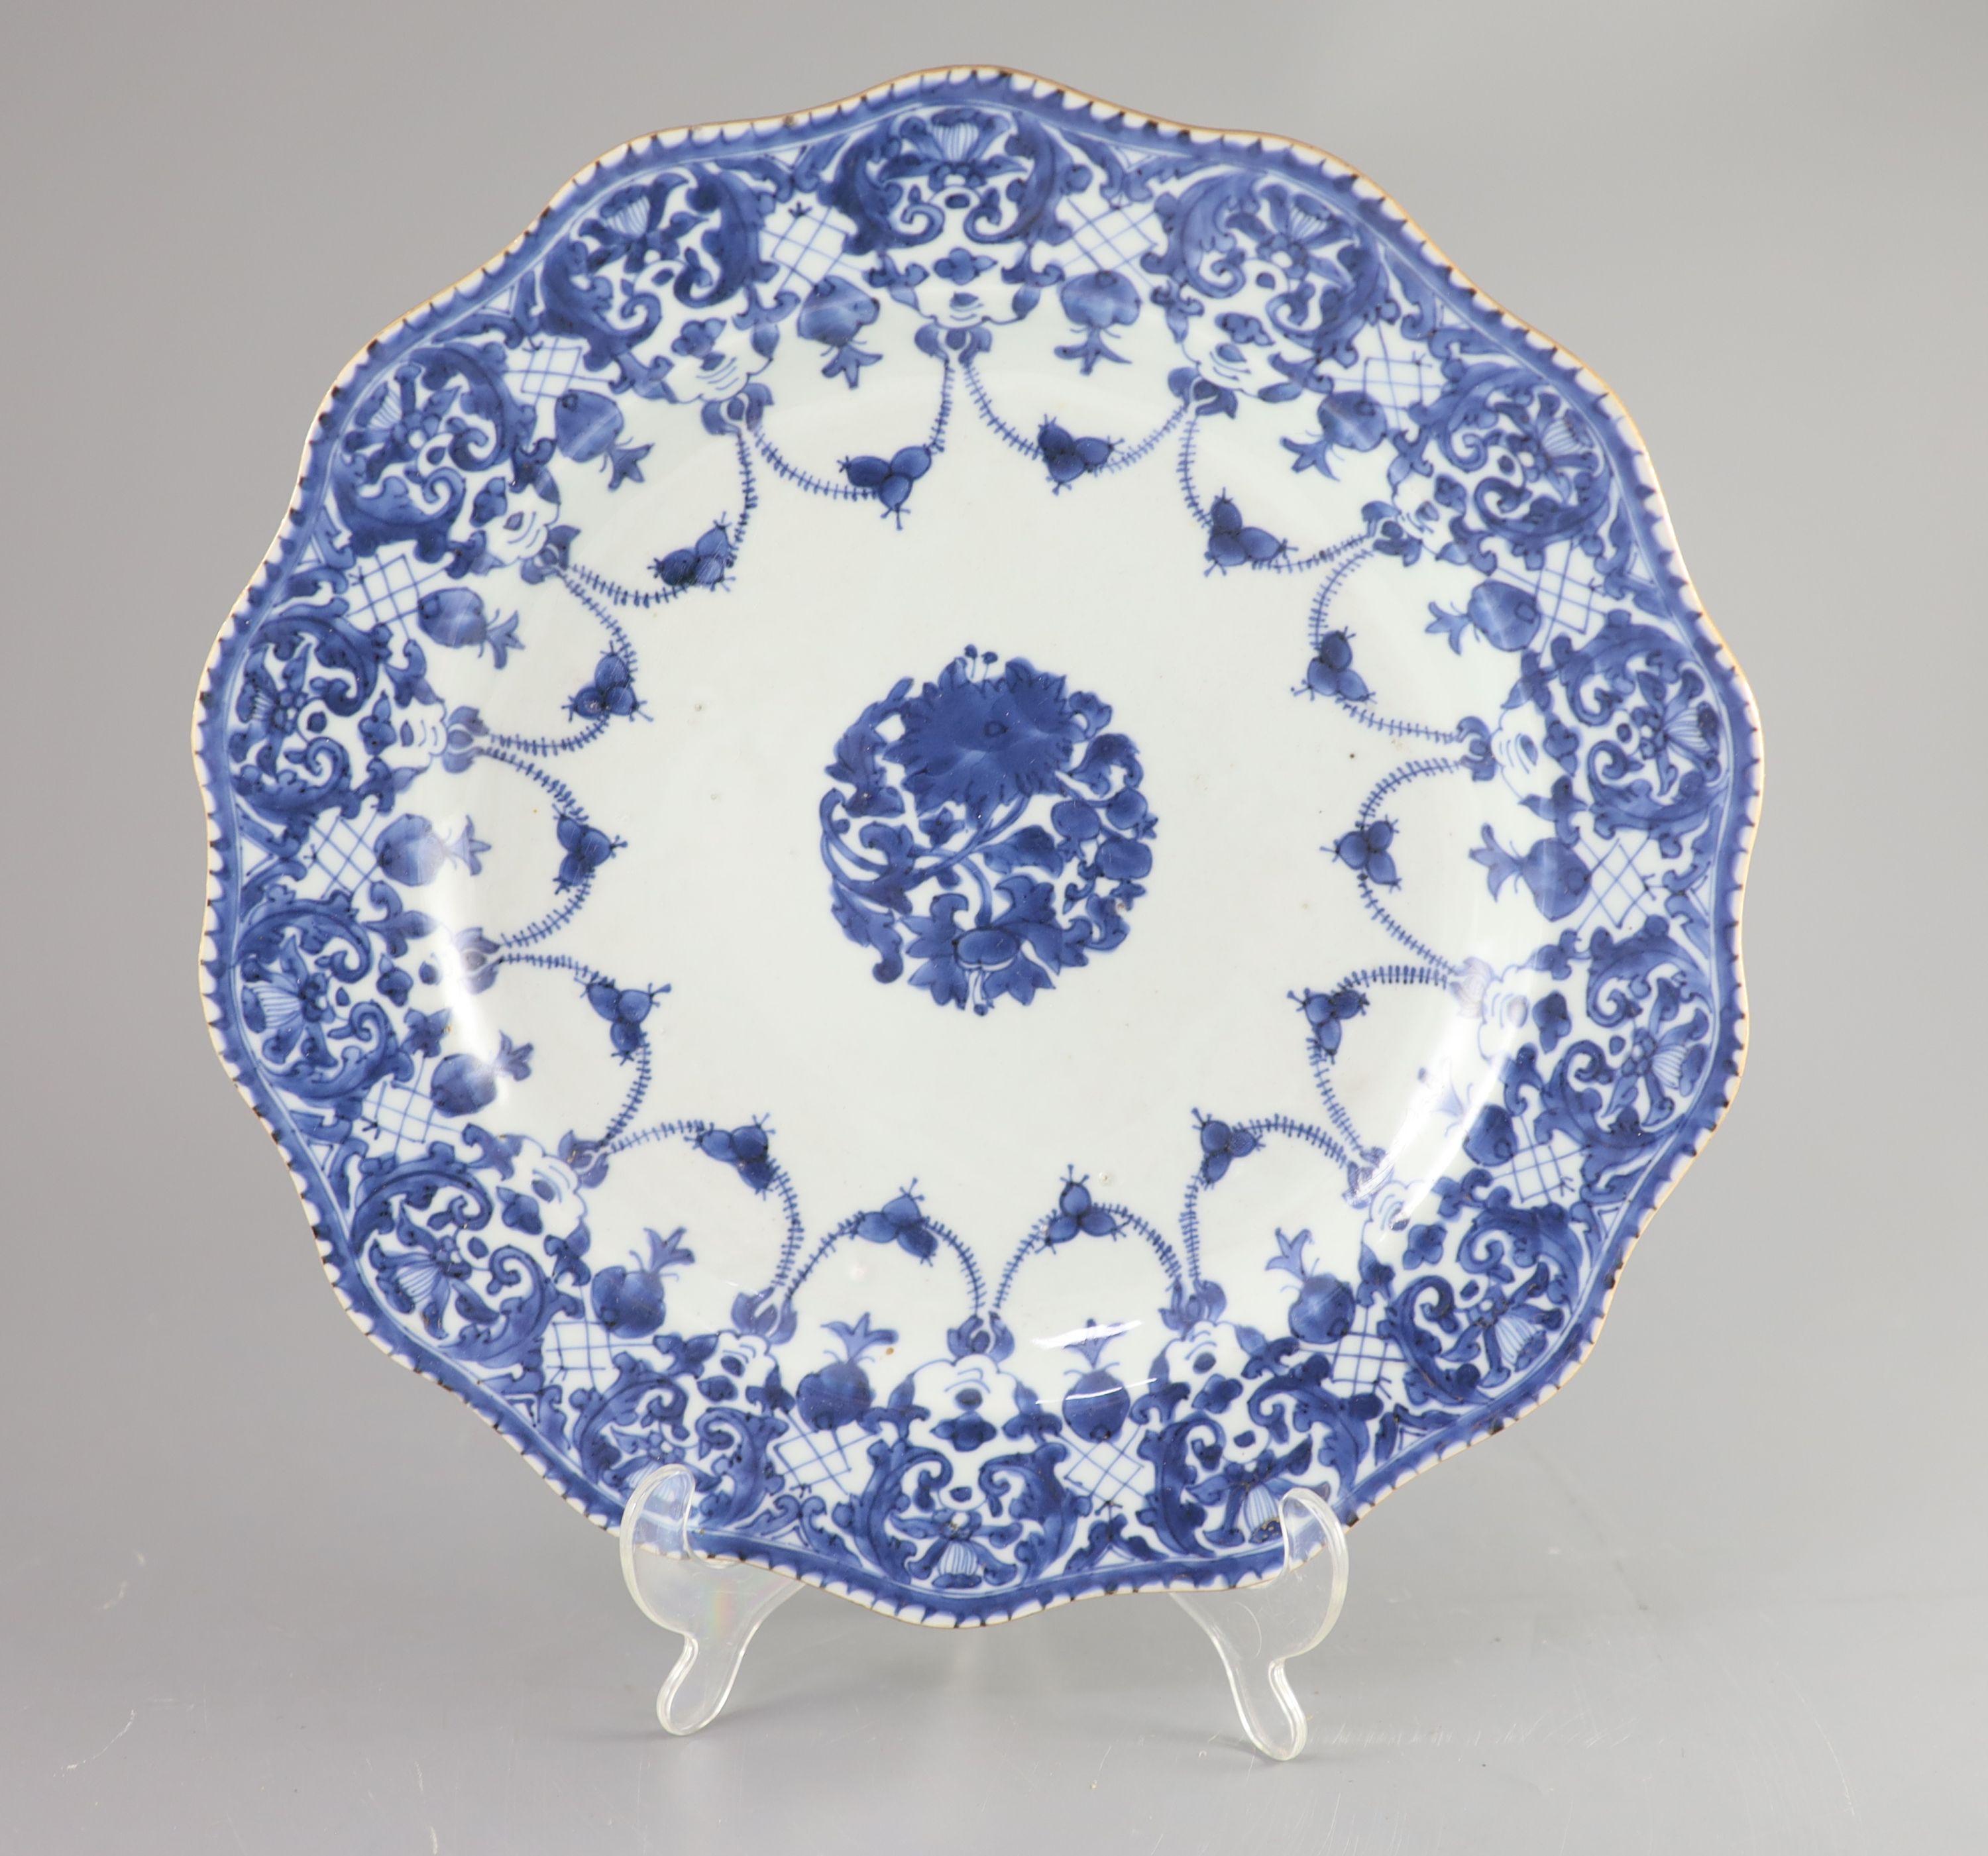 A Chinese porcelain charger, Qing dynasty, mid 18th century, diameter 33cm